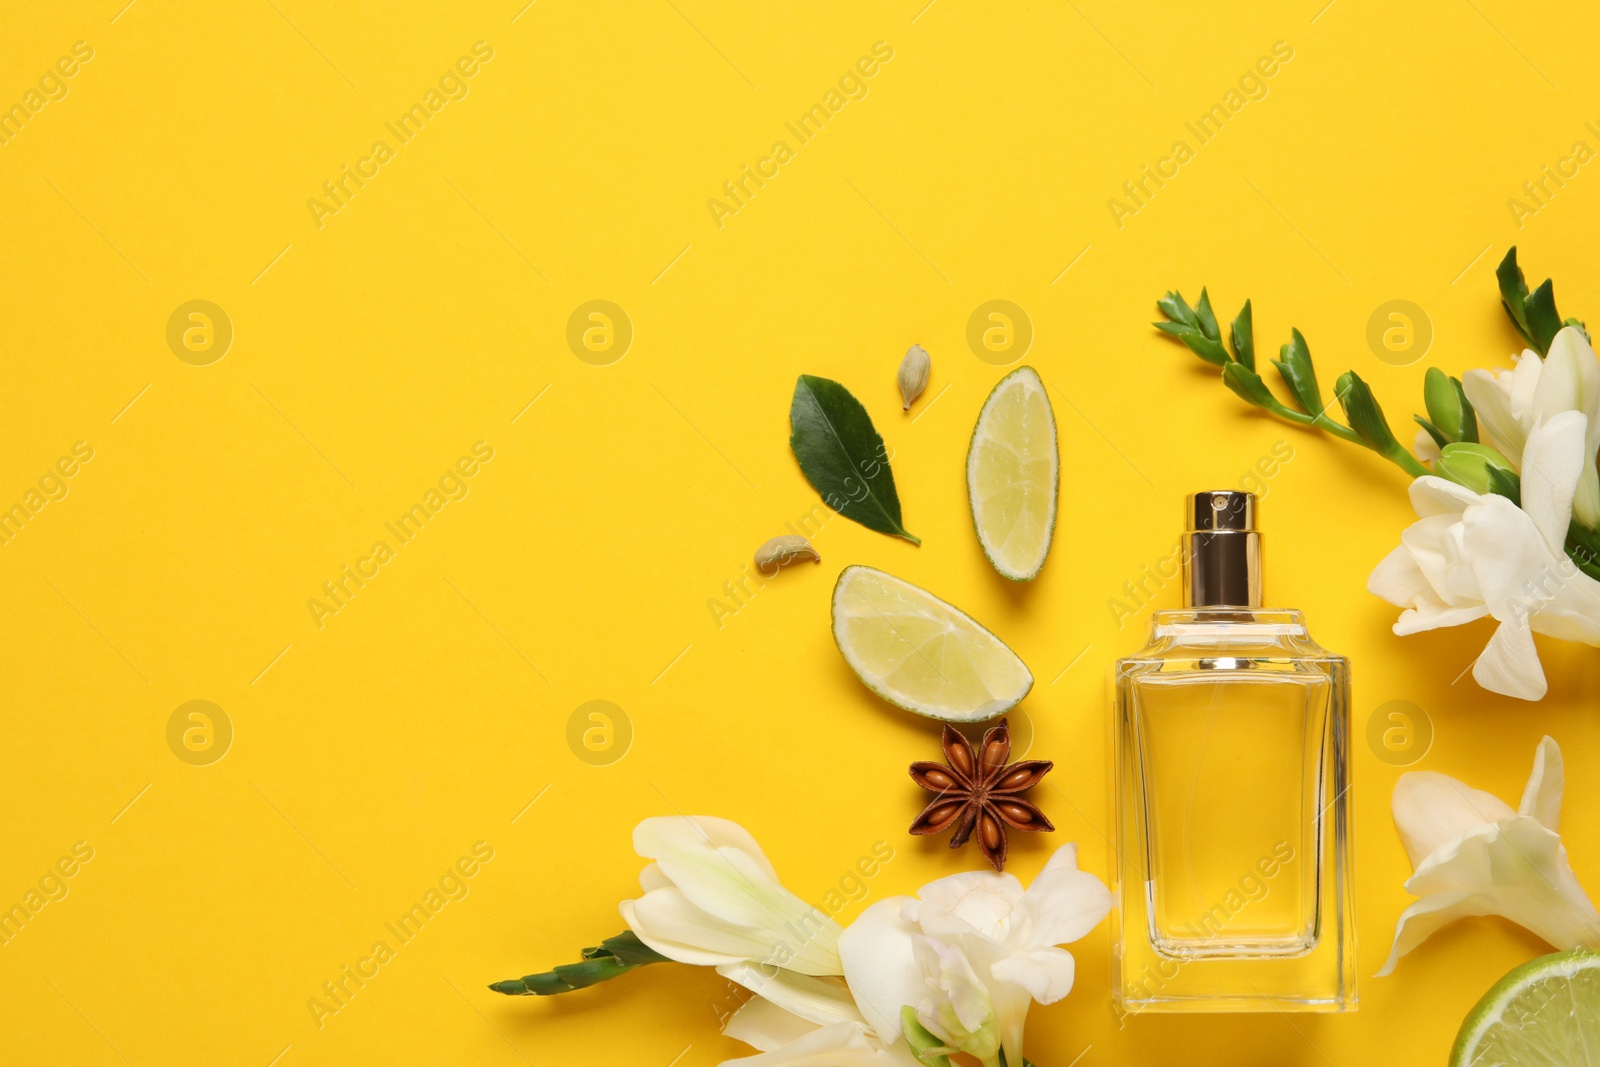 Photo of Flat lay composition with bottle of perfume and fresh citrus fruits on yellow background. Space for text